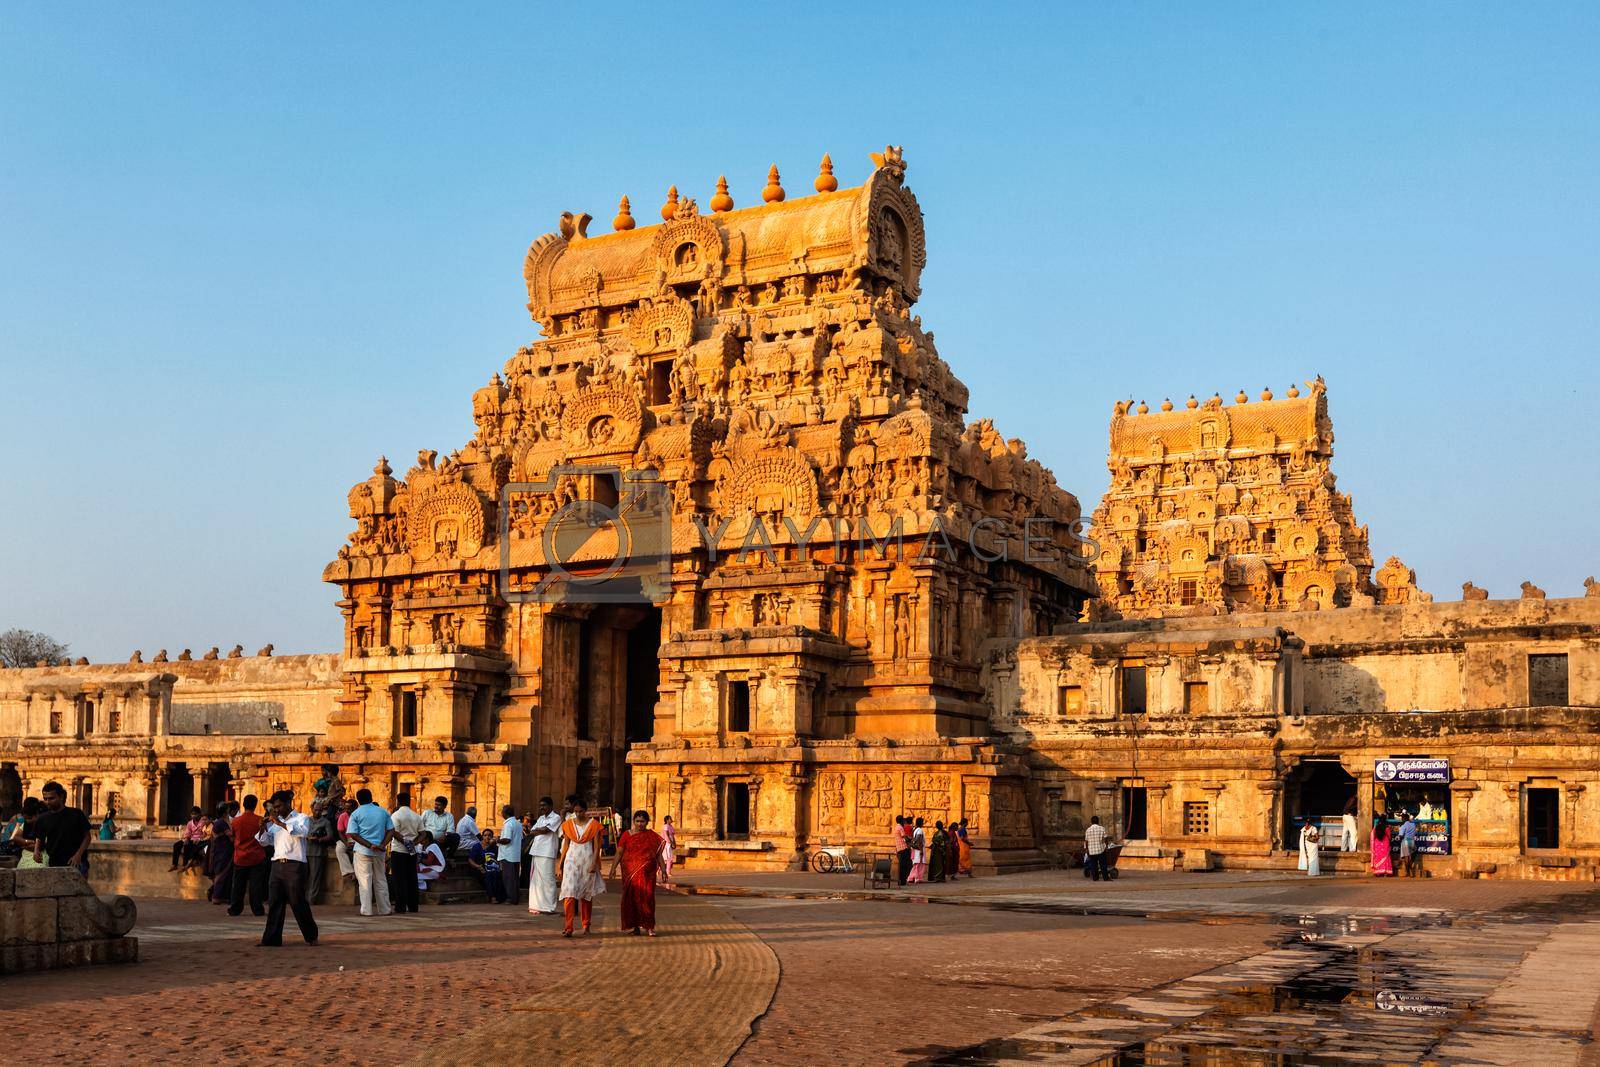 TANJORE, INDIA - MARCH 26, 2011: Famous Brihadishwarar Temple in Tanjore (Thanjavur), Tamil Nadu, India. UNESCO World Heritage Site and religious pilgrimage site Greatest of Great Living Chola Temples